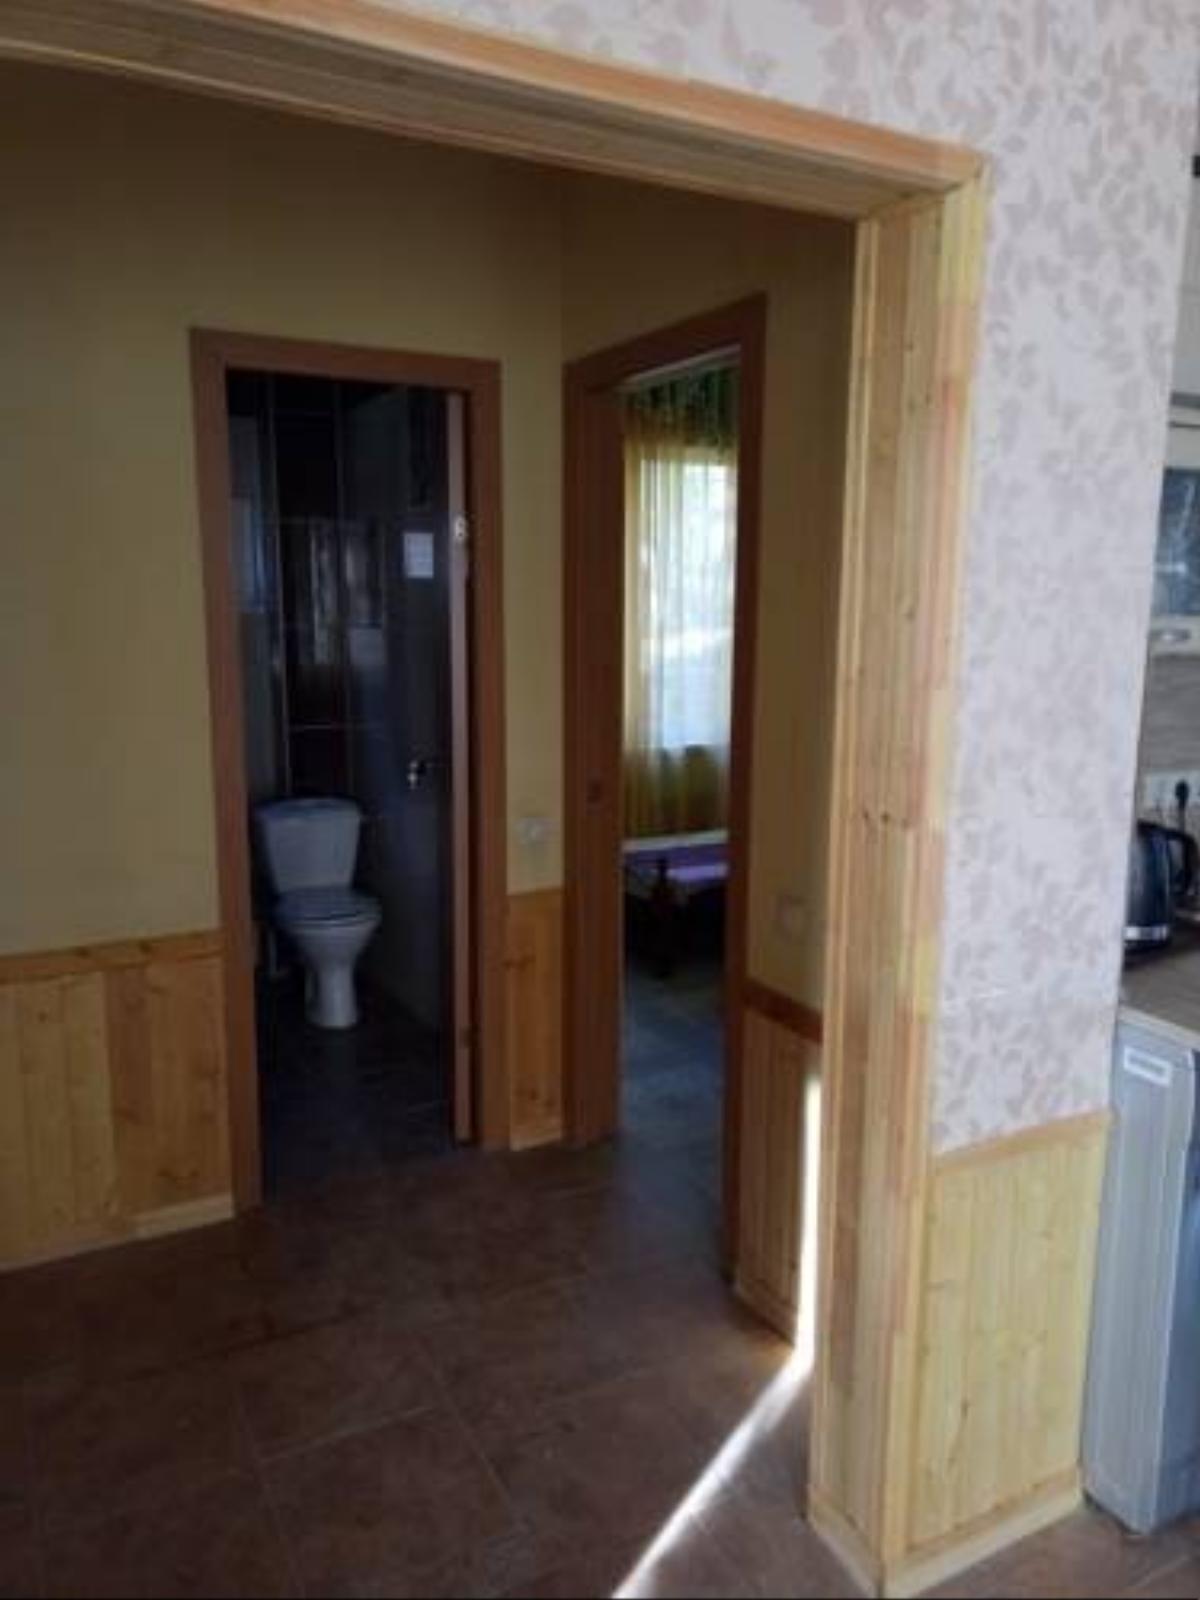 Guest House on Magnitogorskaya 13/104 Hotel Loo Russia